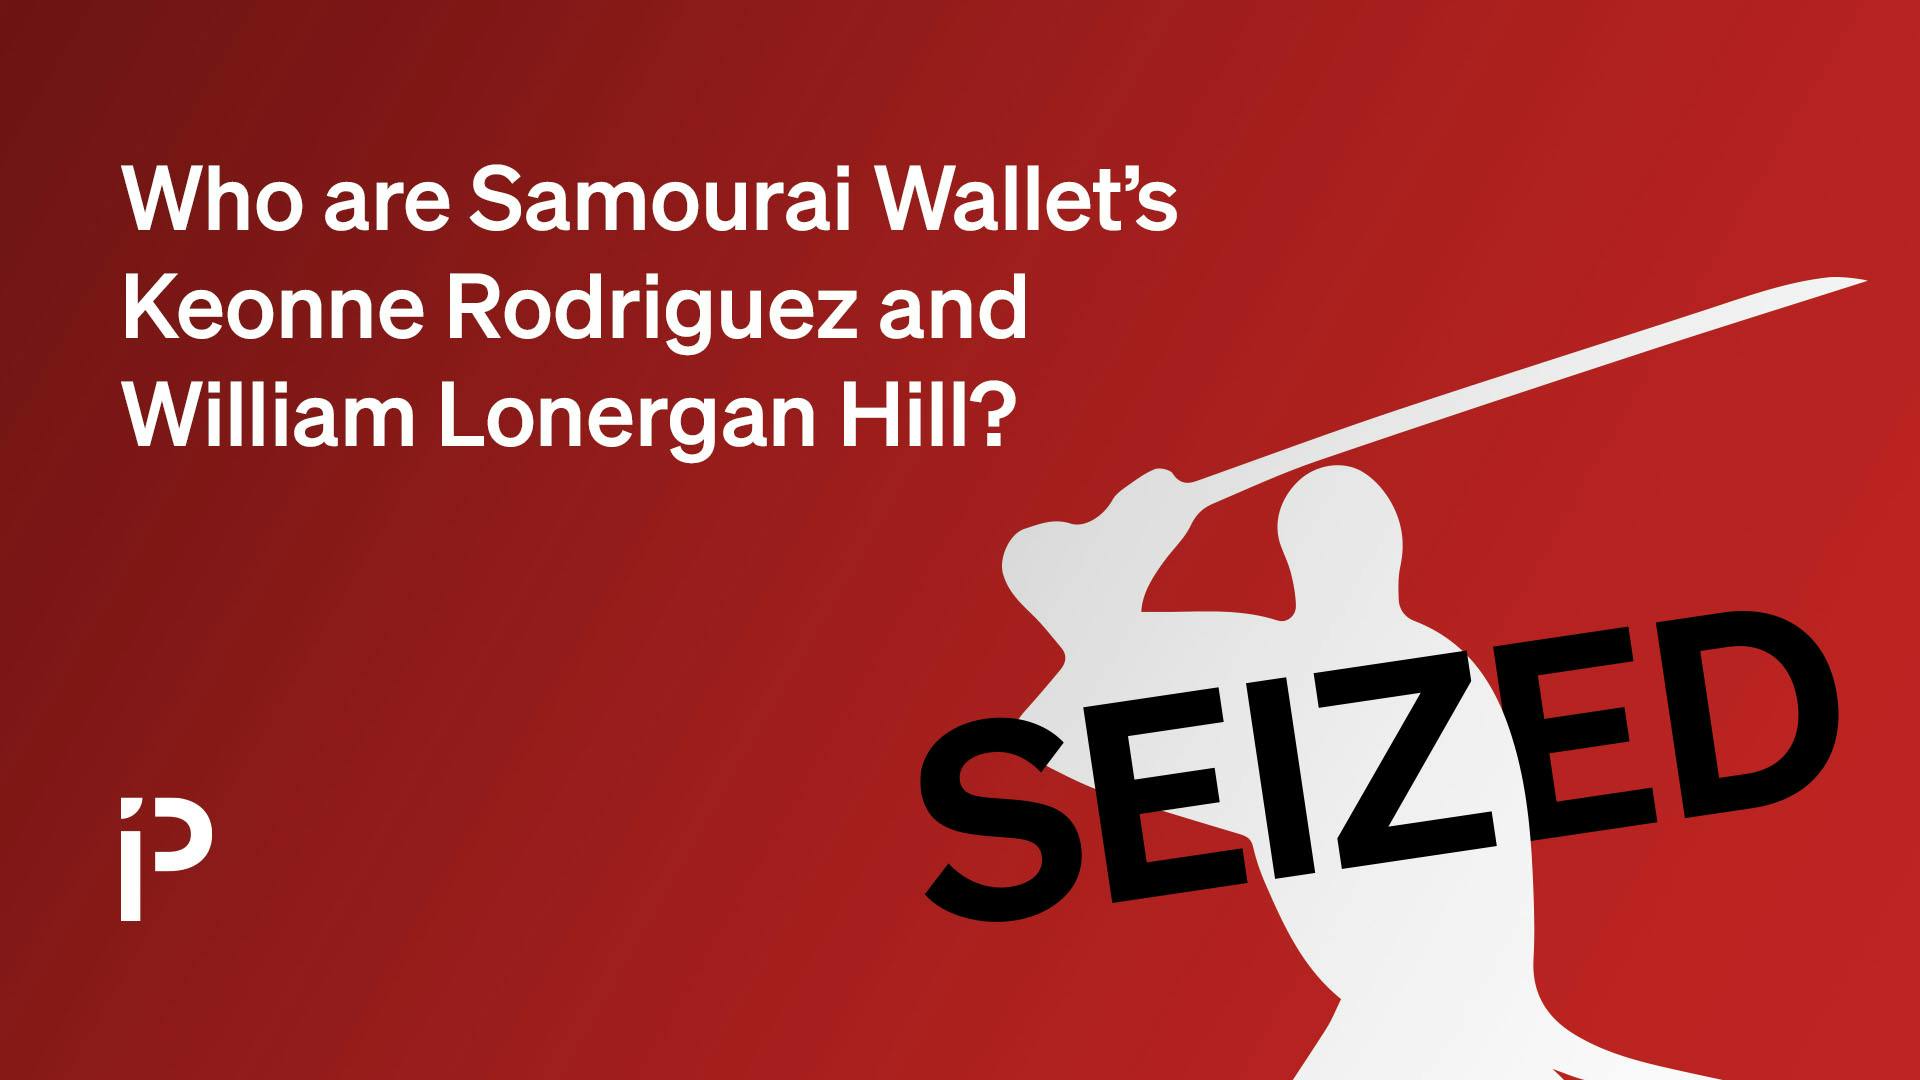 Samourai Wallet Founders Arrested for Laundering $100M, $2B in Illegal Transactions